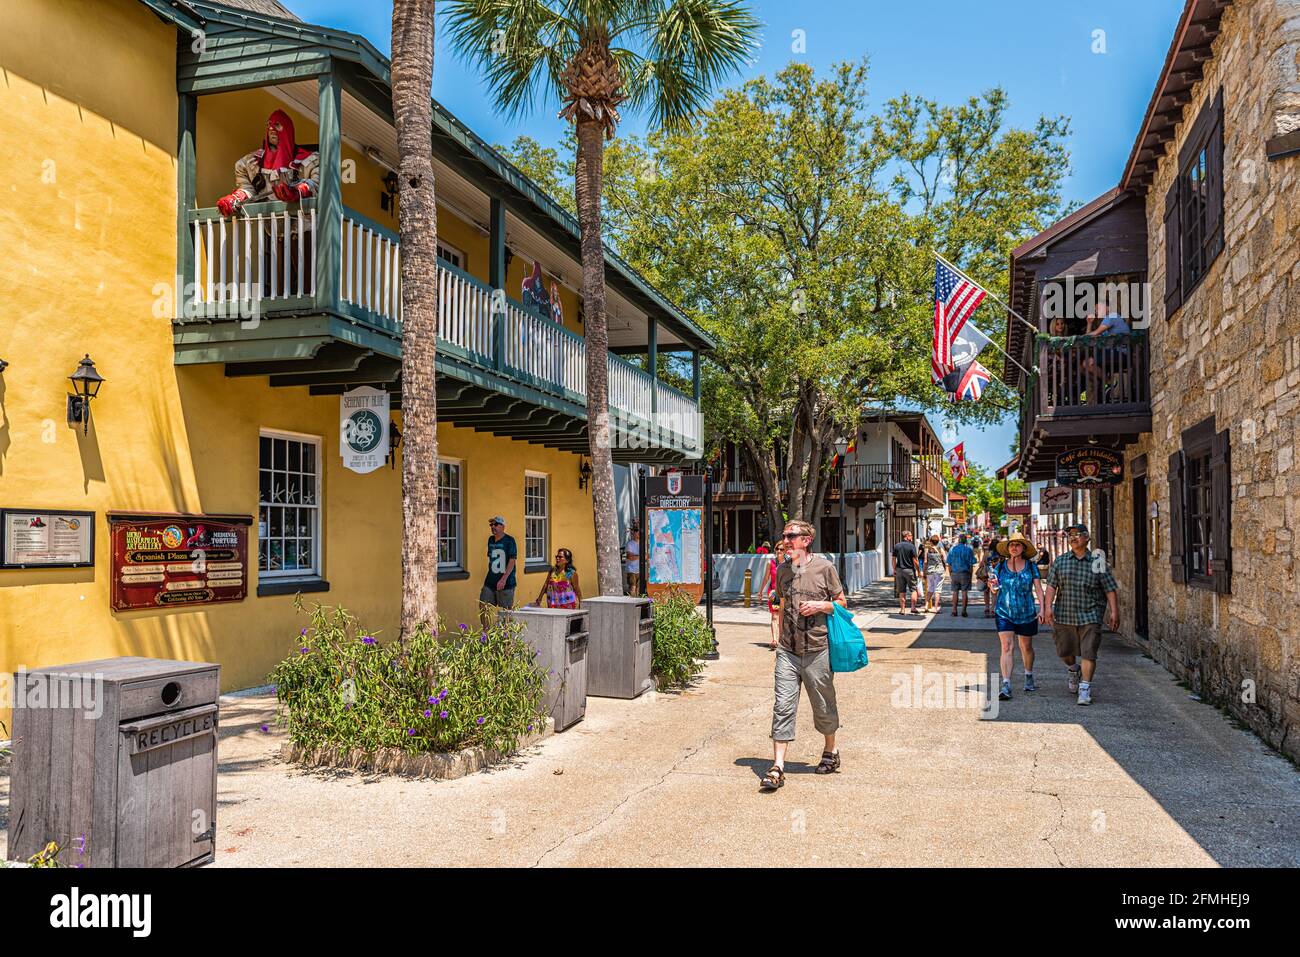 St. Augustine, USA - May 10, 2018: People shopping at Florida city St George Street on summer day by stores shops and restaurants in old town Stock Photo